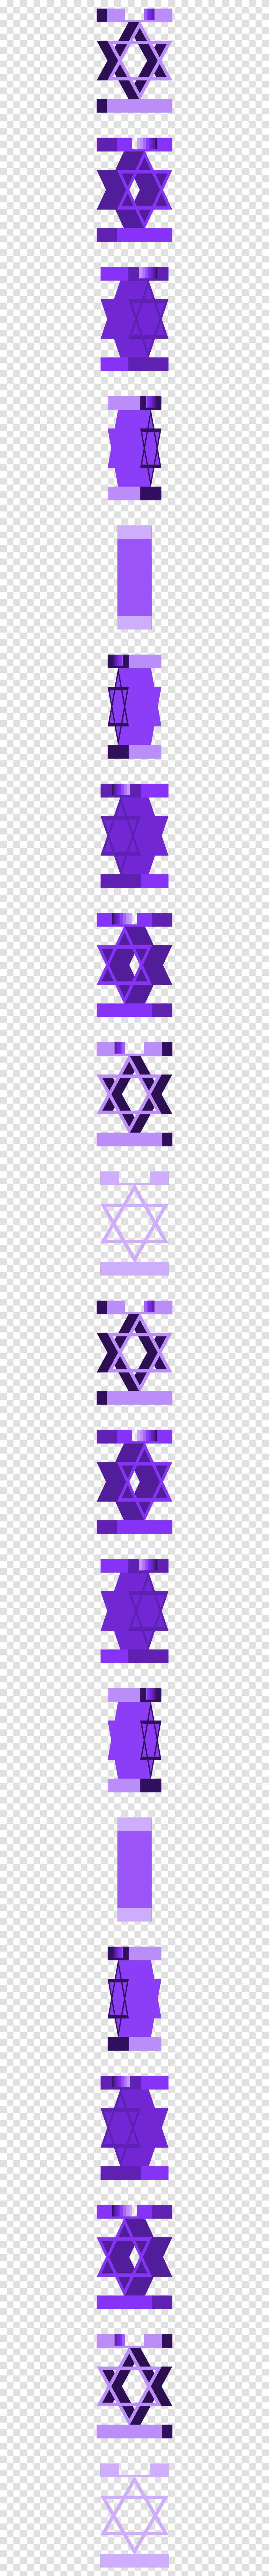 Israel, Seesaw, Toy, Purple Transparent Png